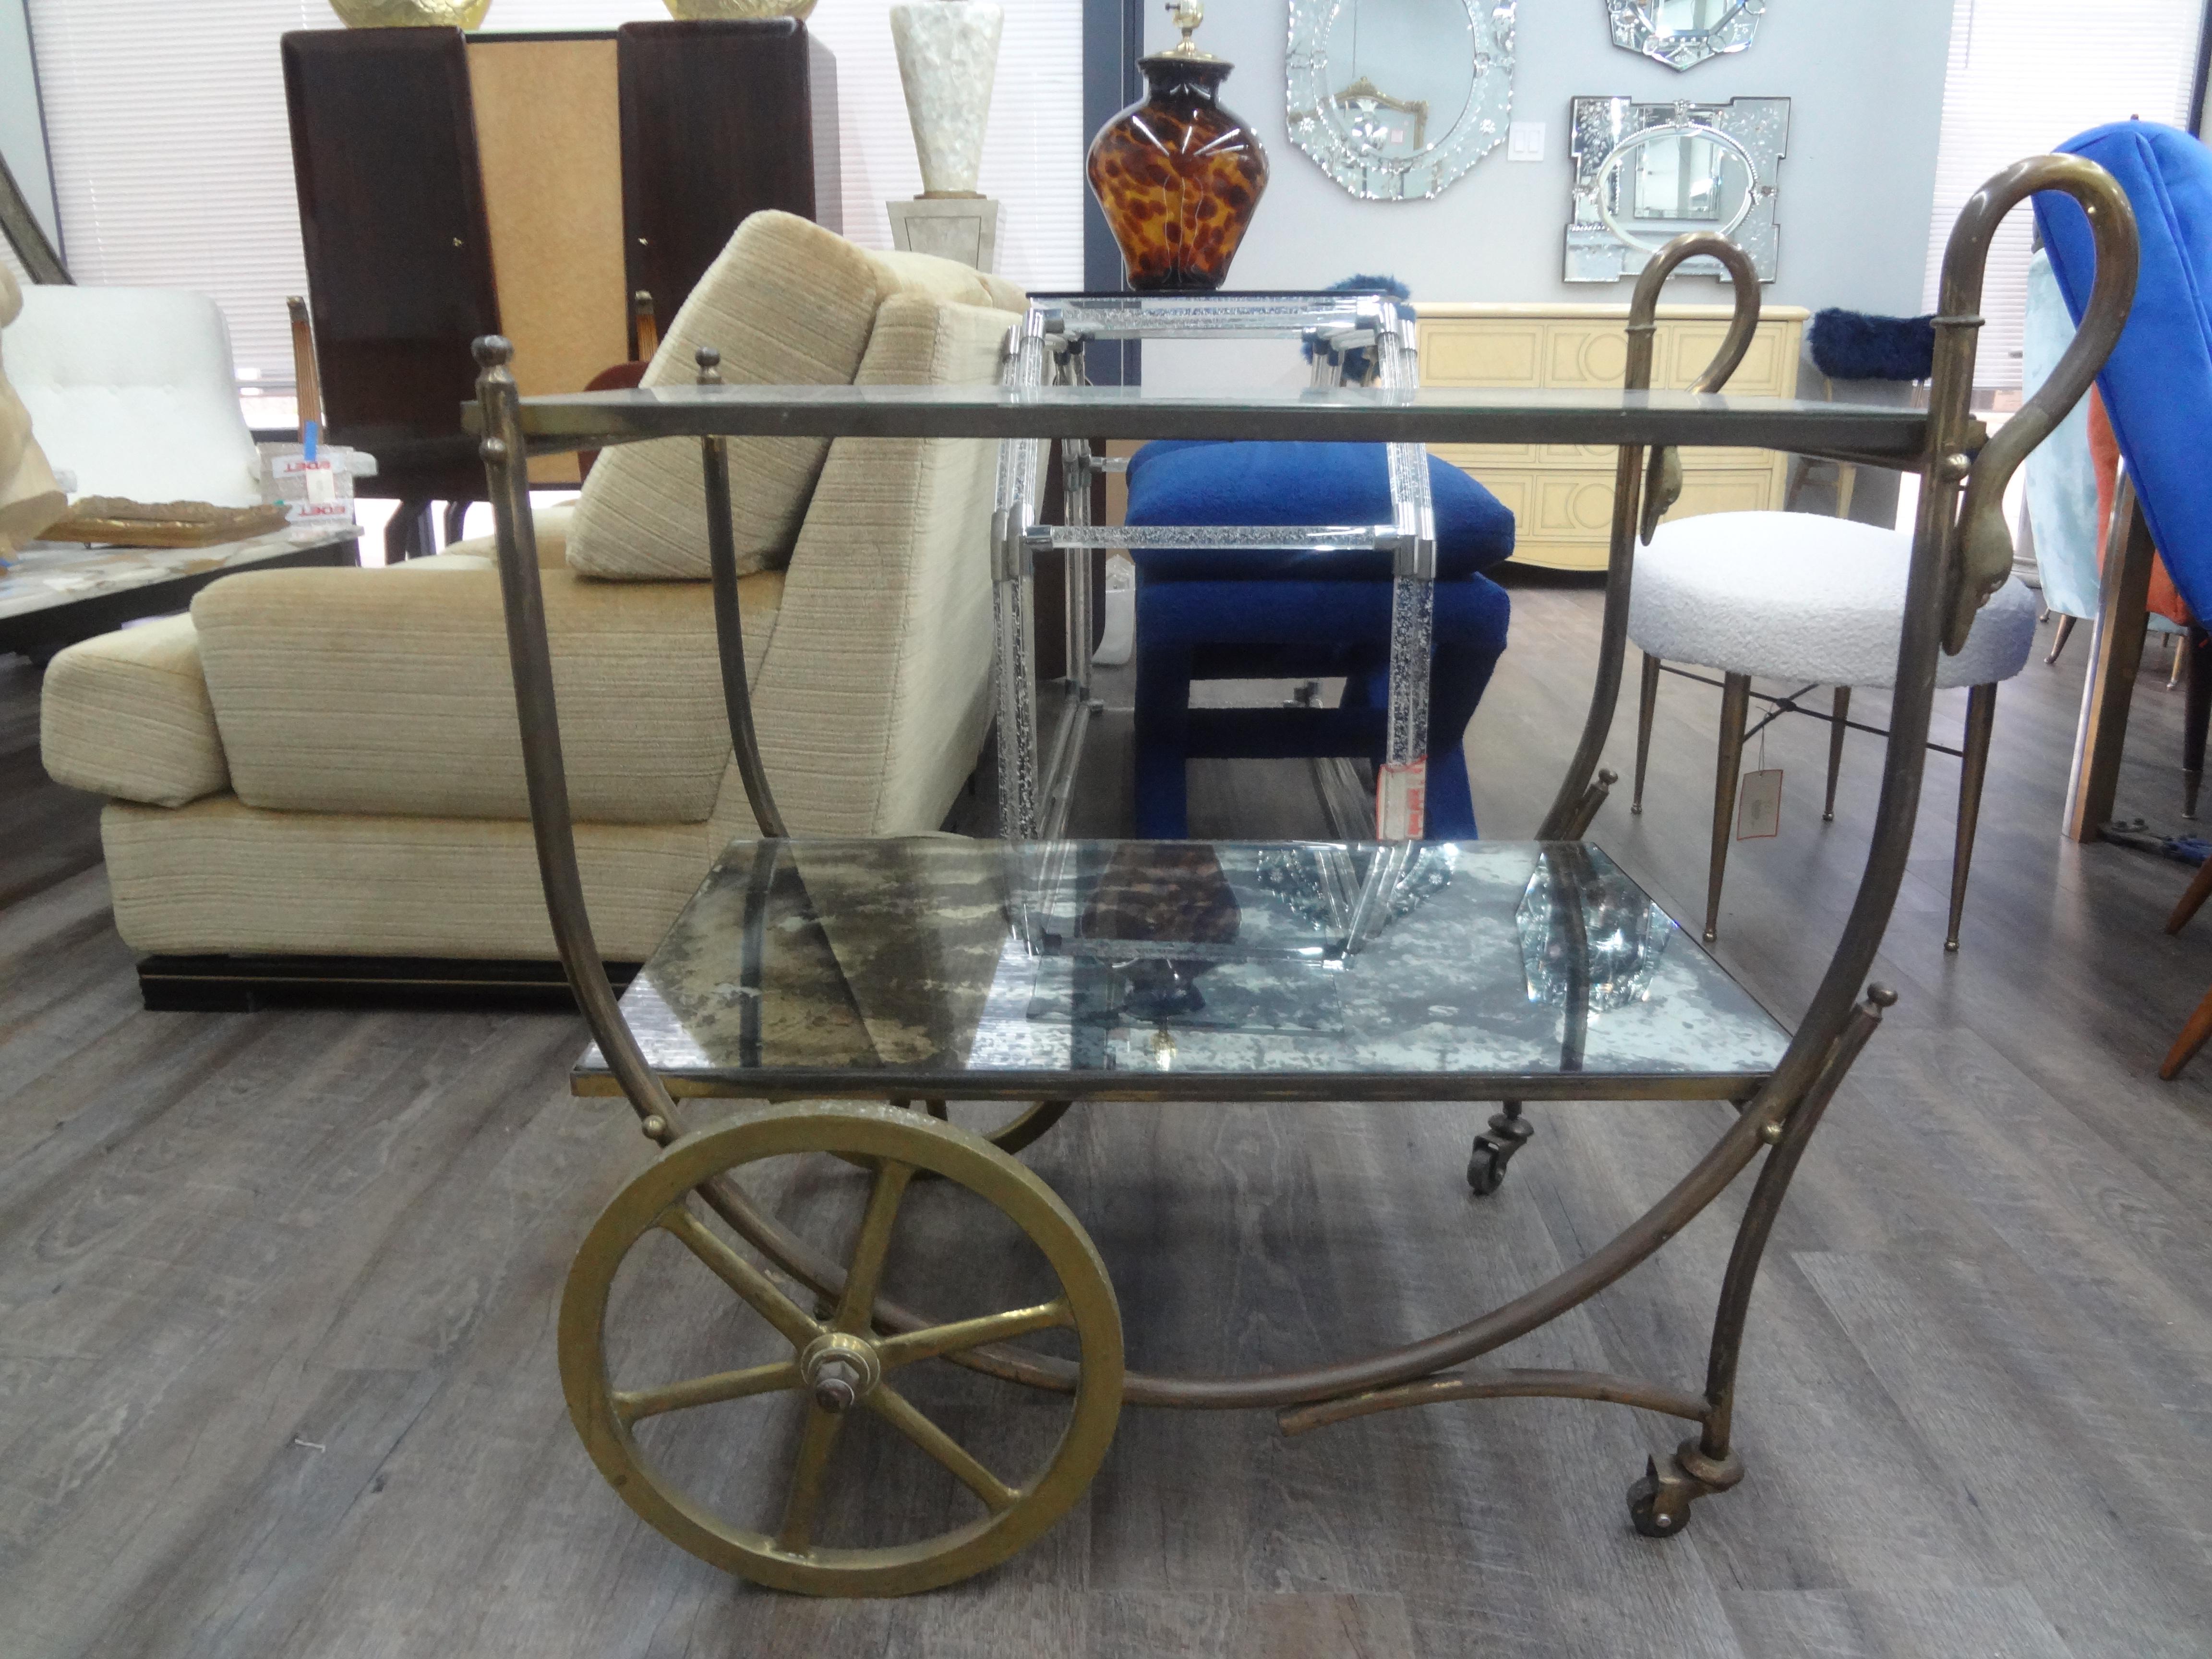 French Maison Jansen attributed Neoclassical style bronze bar cart.
This stunning French Neoclassical style bronze bar cart has stunning large wheels, swan handles and two shelves with verre eglomisé (reverse decorated glass) tops.
Great bar cart or